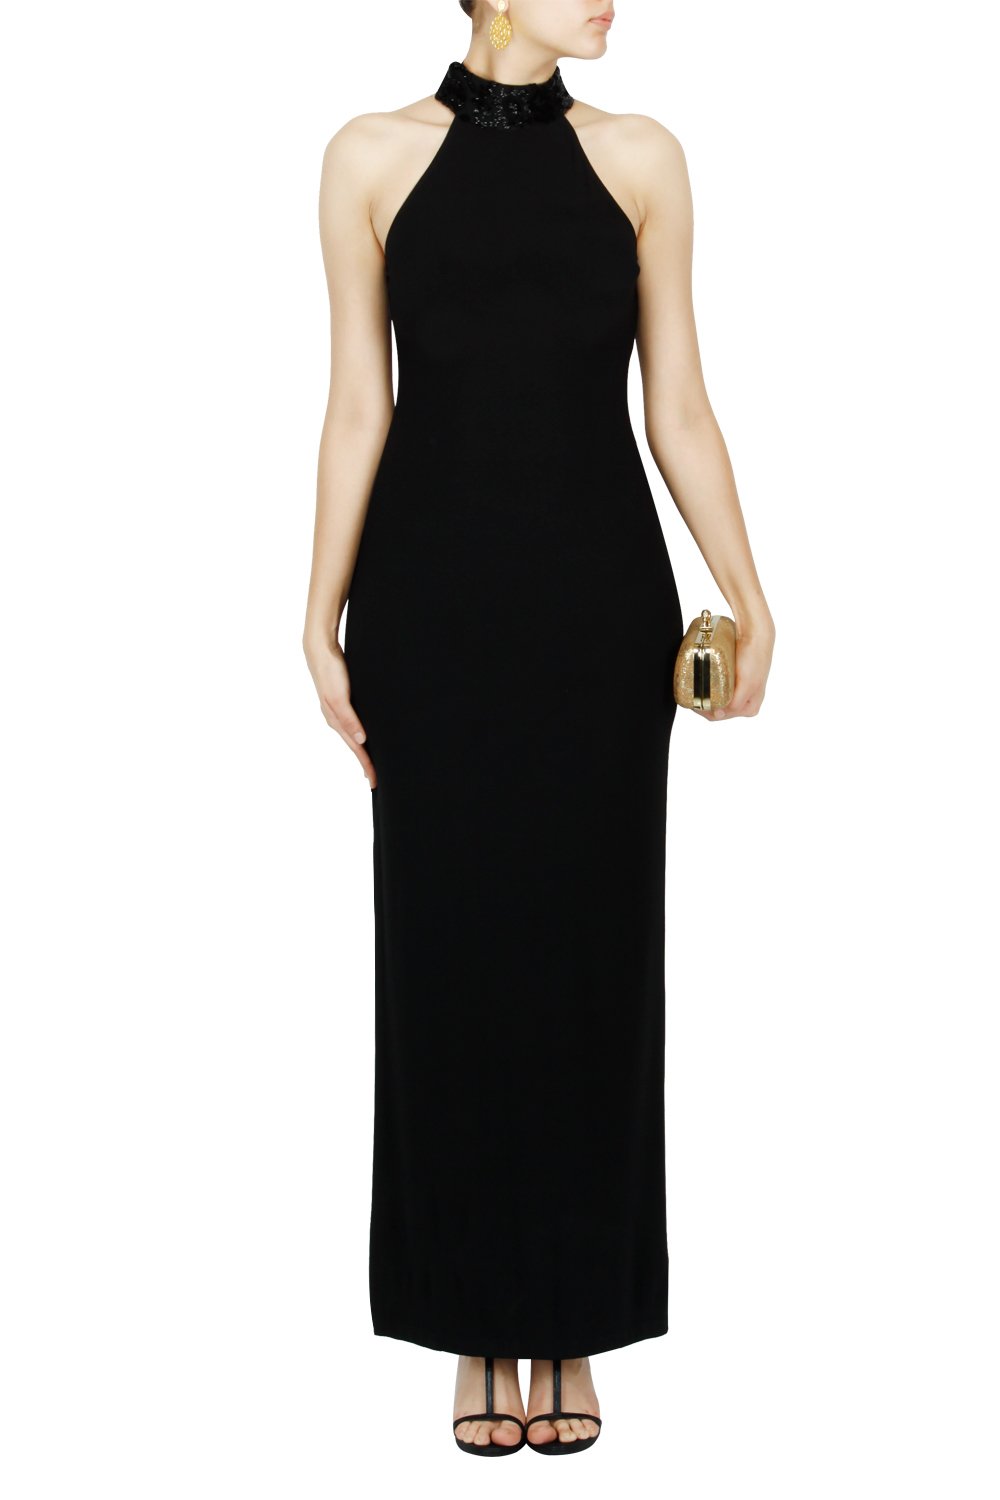 Gowns, Black halter neck gown with embroidered sheer back